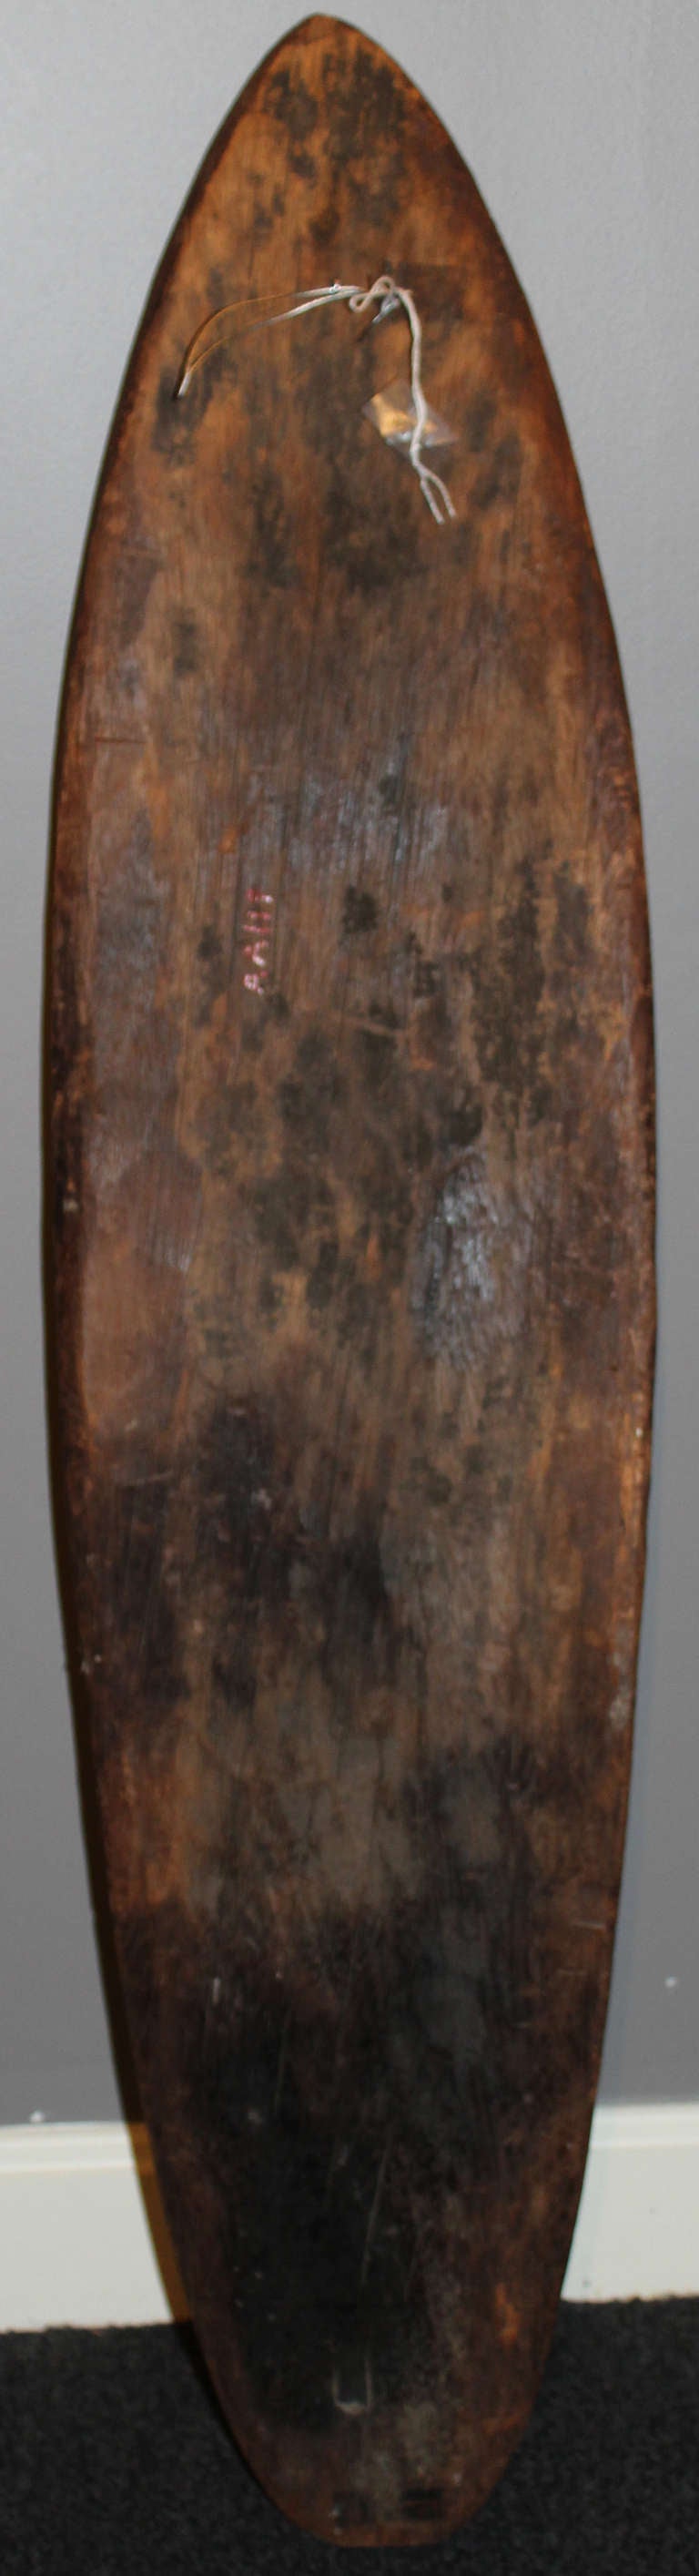 Papua New Guinean Papuan Gulf Gope Board from New Guinea Africa